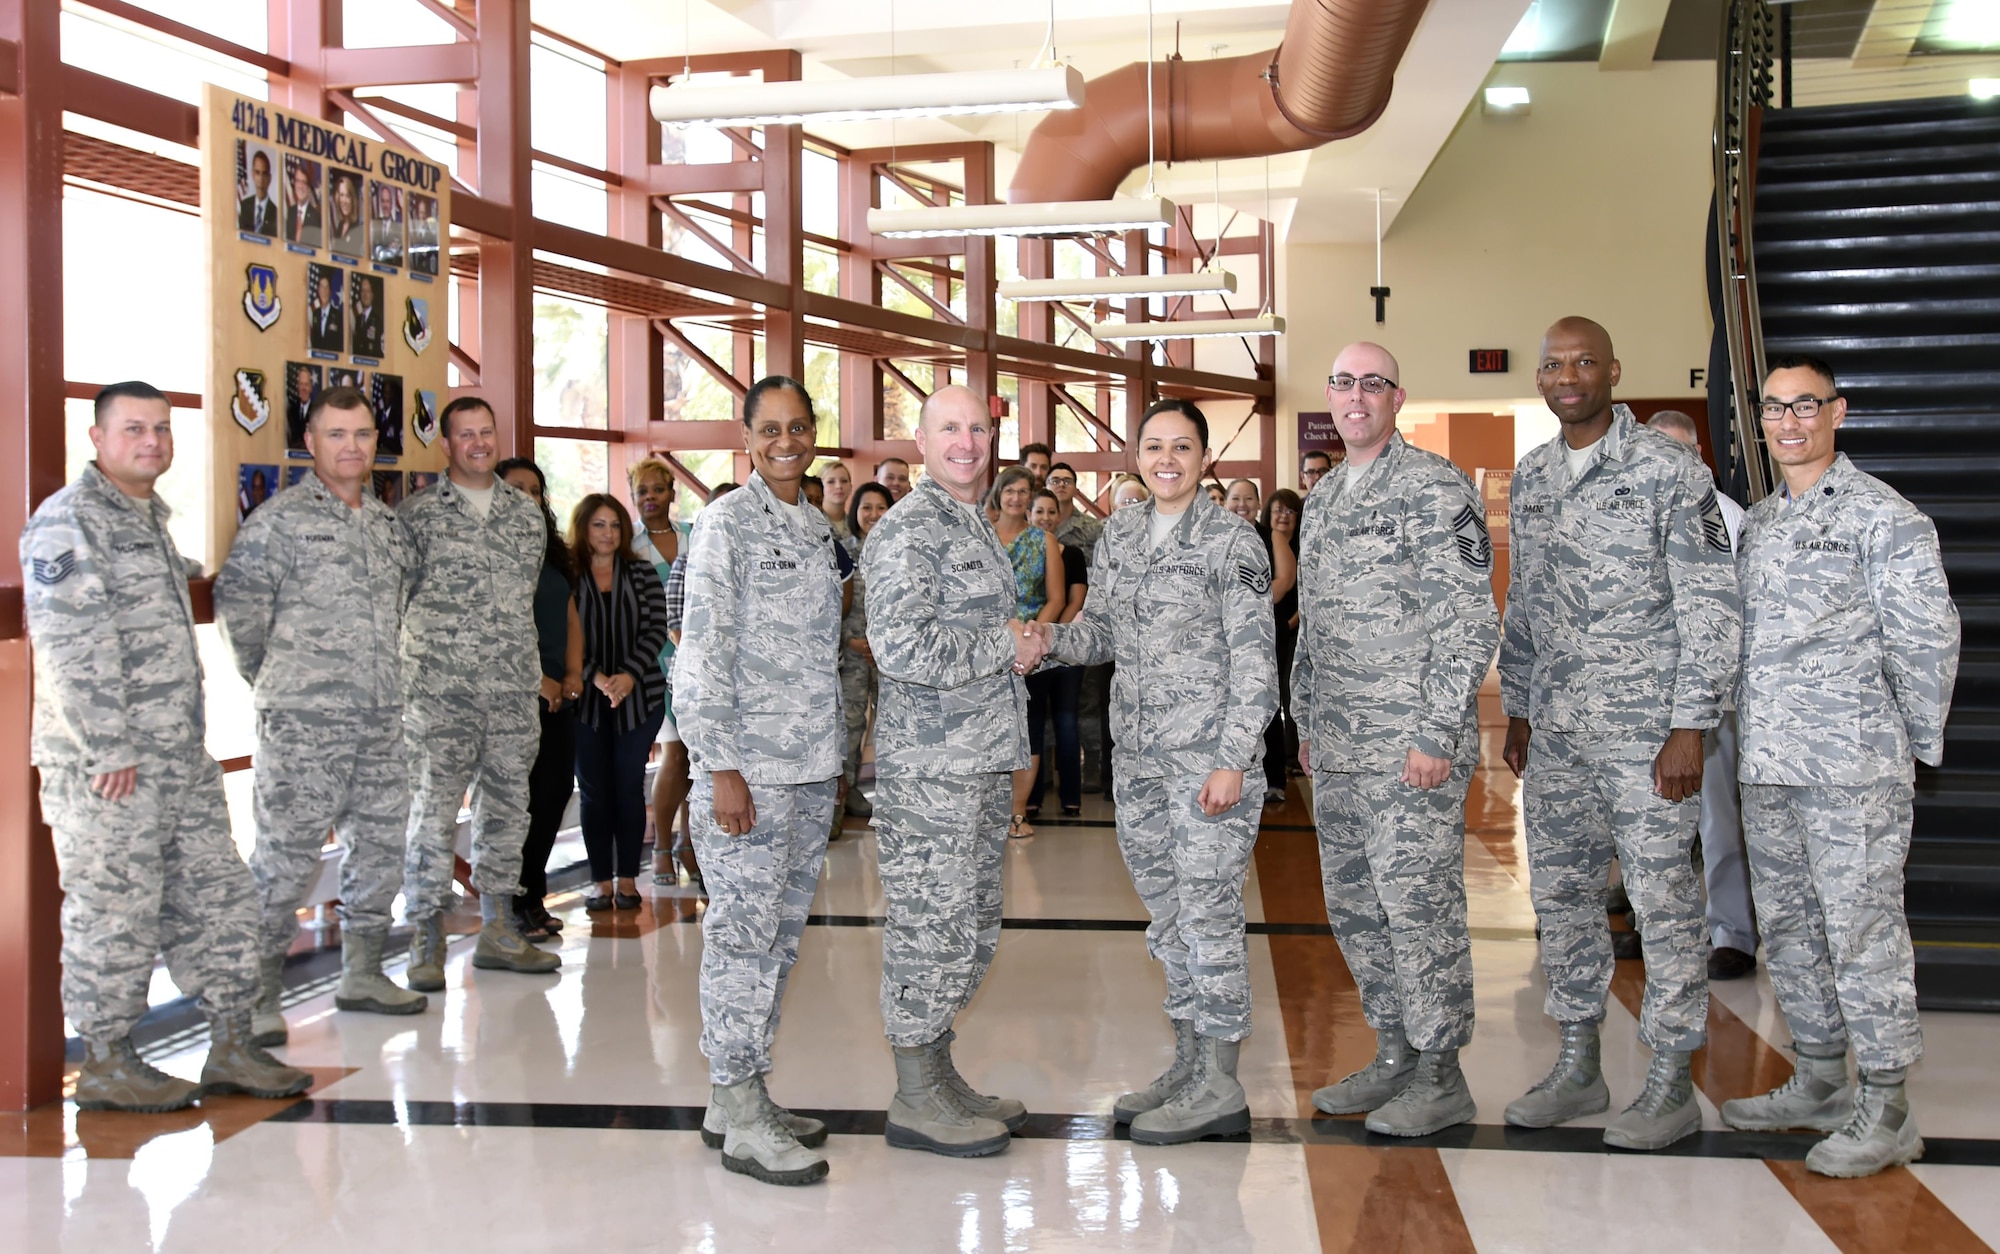 Staff Sgt. Raquel Caramanno, 412th Medical Group, is congratulated by Brig. Gen. Carl Schaefer, 412th Test Wing commander, and the 412th MDG team, during the announcement of her selection as one of the 12 Air Force Outstanding Airmen of the Year.  Pictured, left to right: 412th Medical Group commander, Col. Karen Dean-Cox; Brig. Gen. Carl Schaefer, Staff Sgt. Racquel Caramanno; Chief Master Sgt. Anthony Soto, 412th MDG; Chief Master Sgt. Todd Simmons, 412th TW command chief; and Lt. Col. David Huinker, 412th Medical Support Squadron commander. (U.S. Air Force photo by Dawn Waldman)